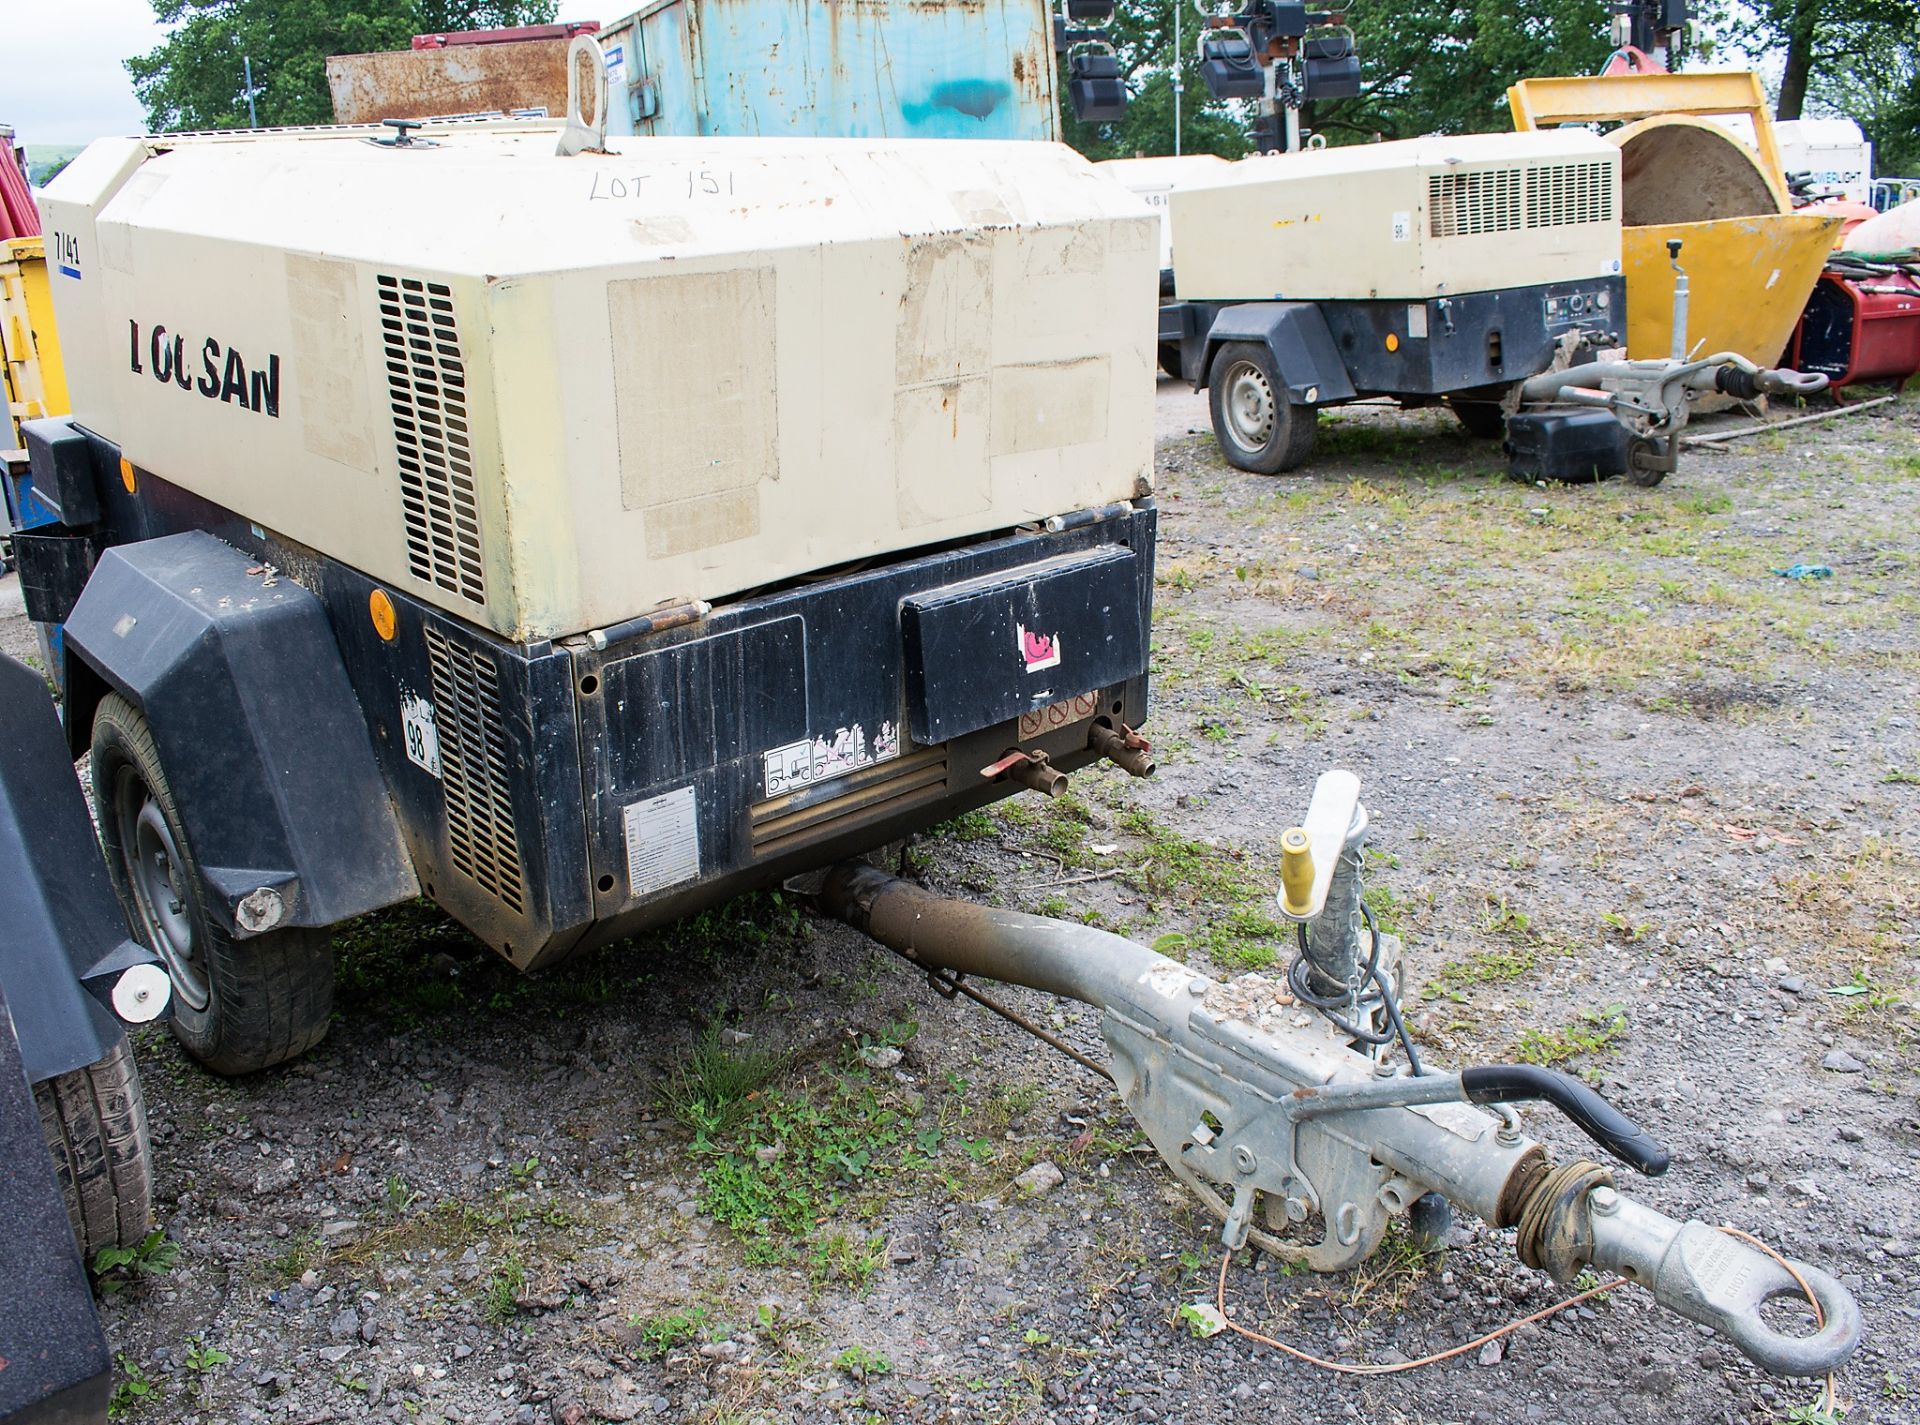 Doosan 7/41 diesel driven mobile air compressor Year: 2013 S/N: 432289 Recorded Hours: 426 A602696